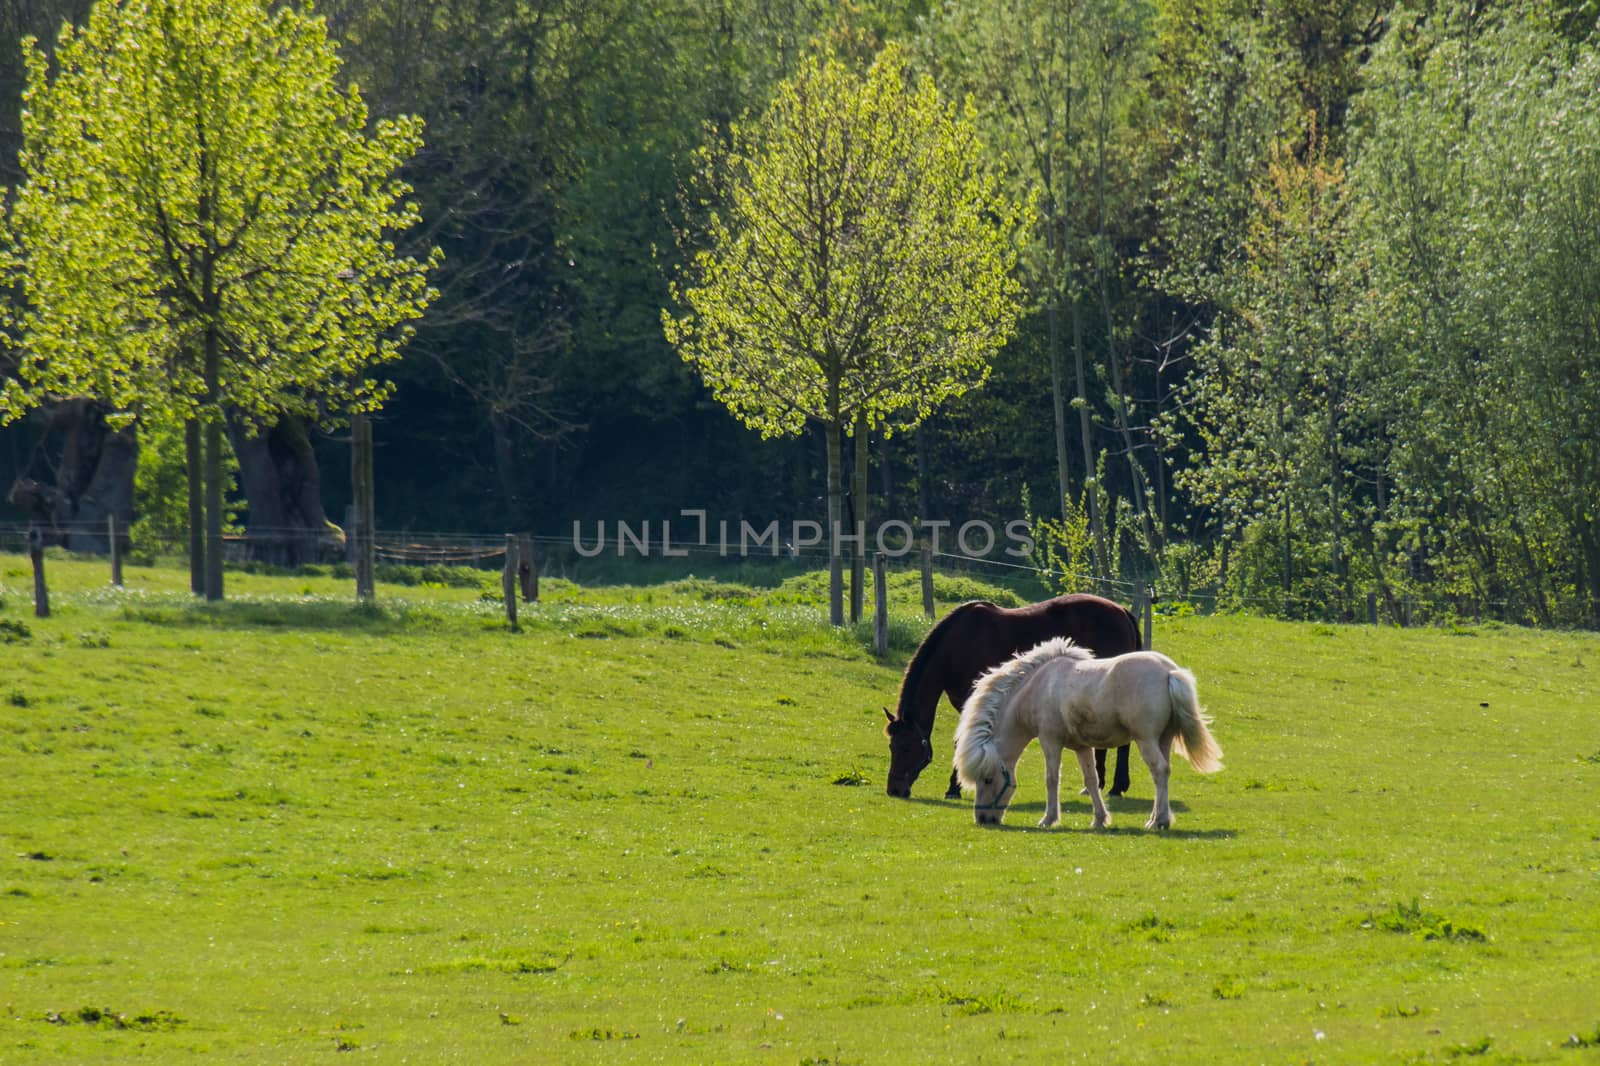 Black and brown horses walking over grassland in front of trees